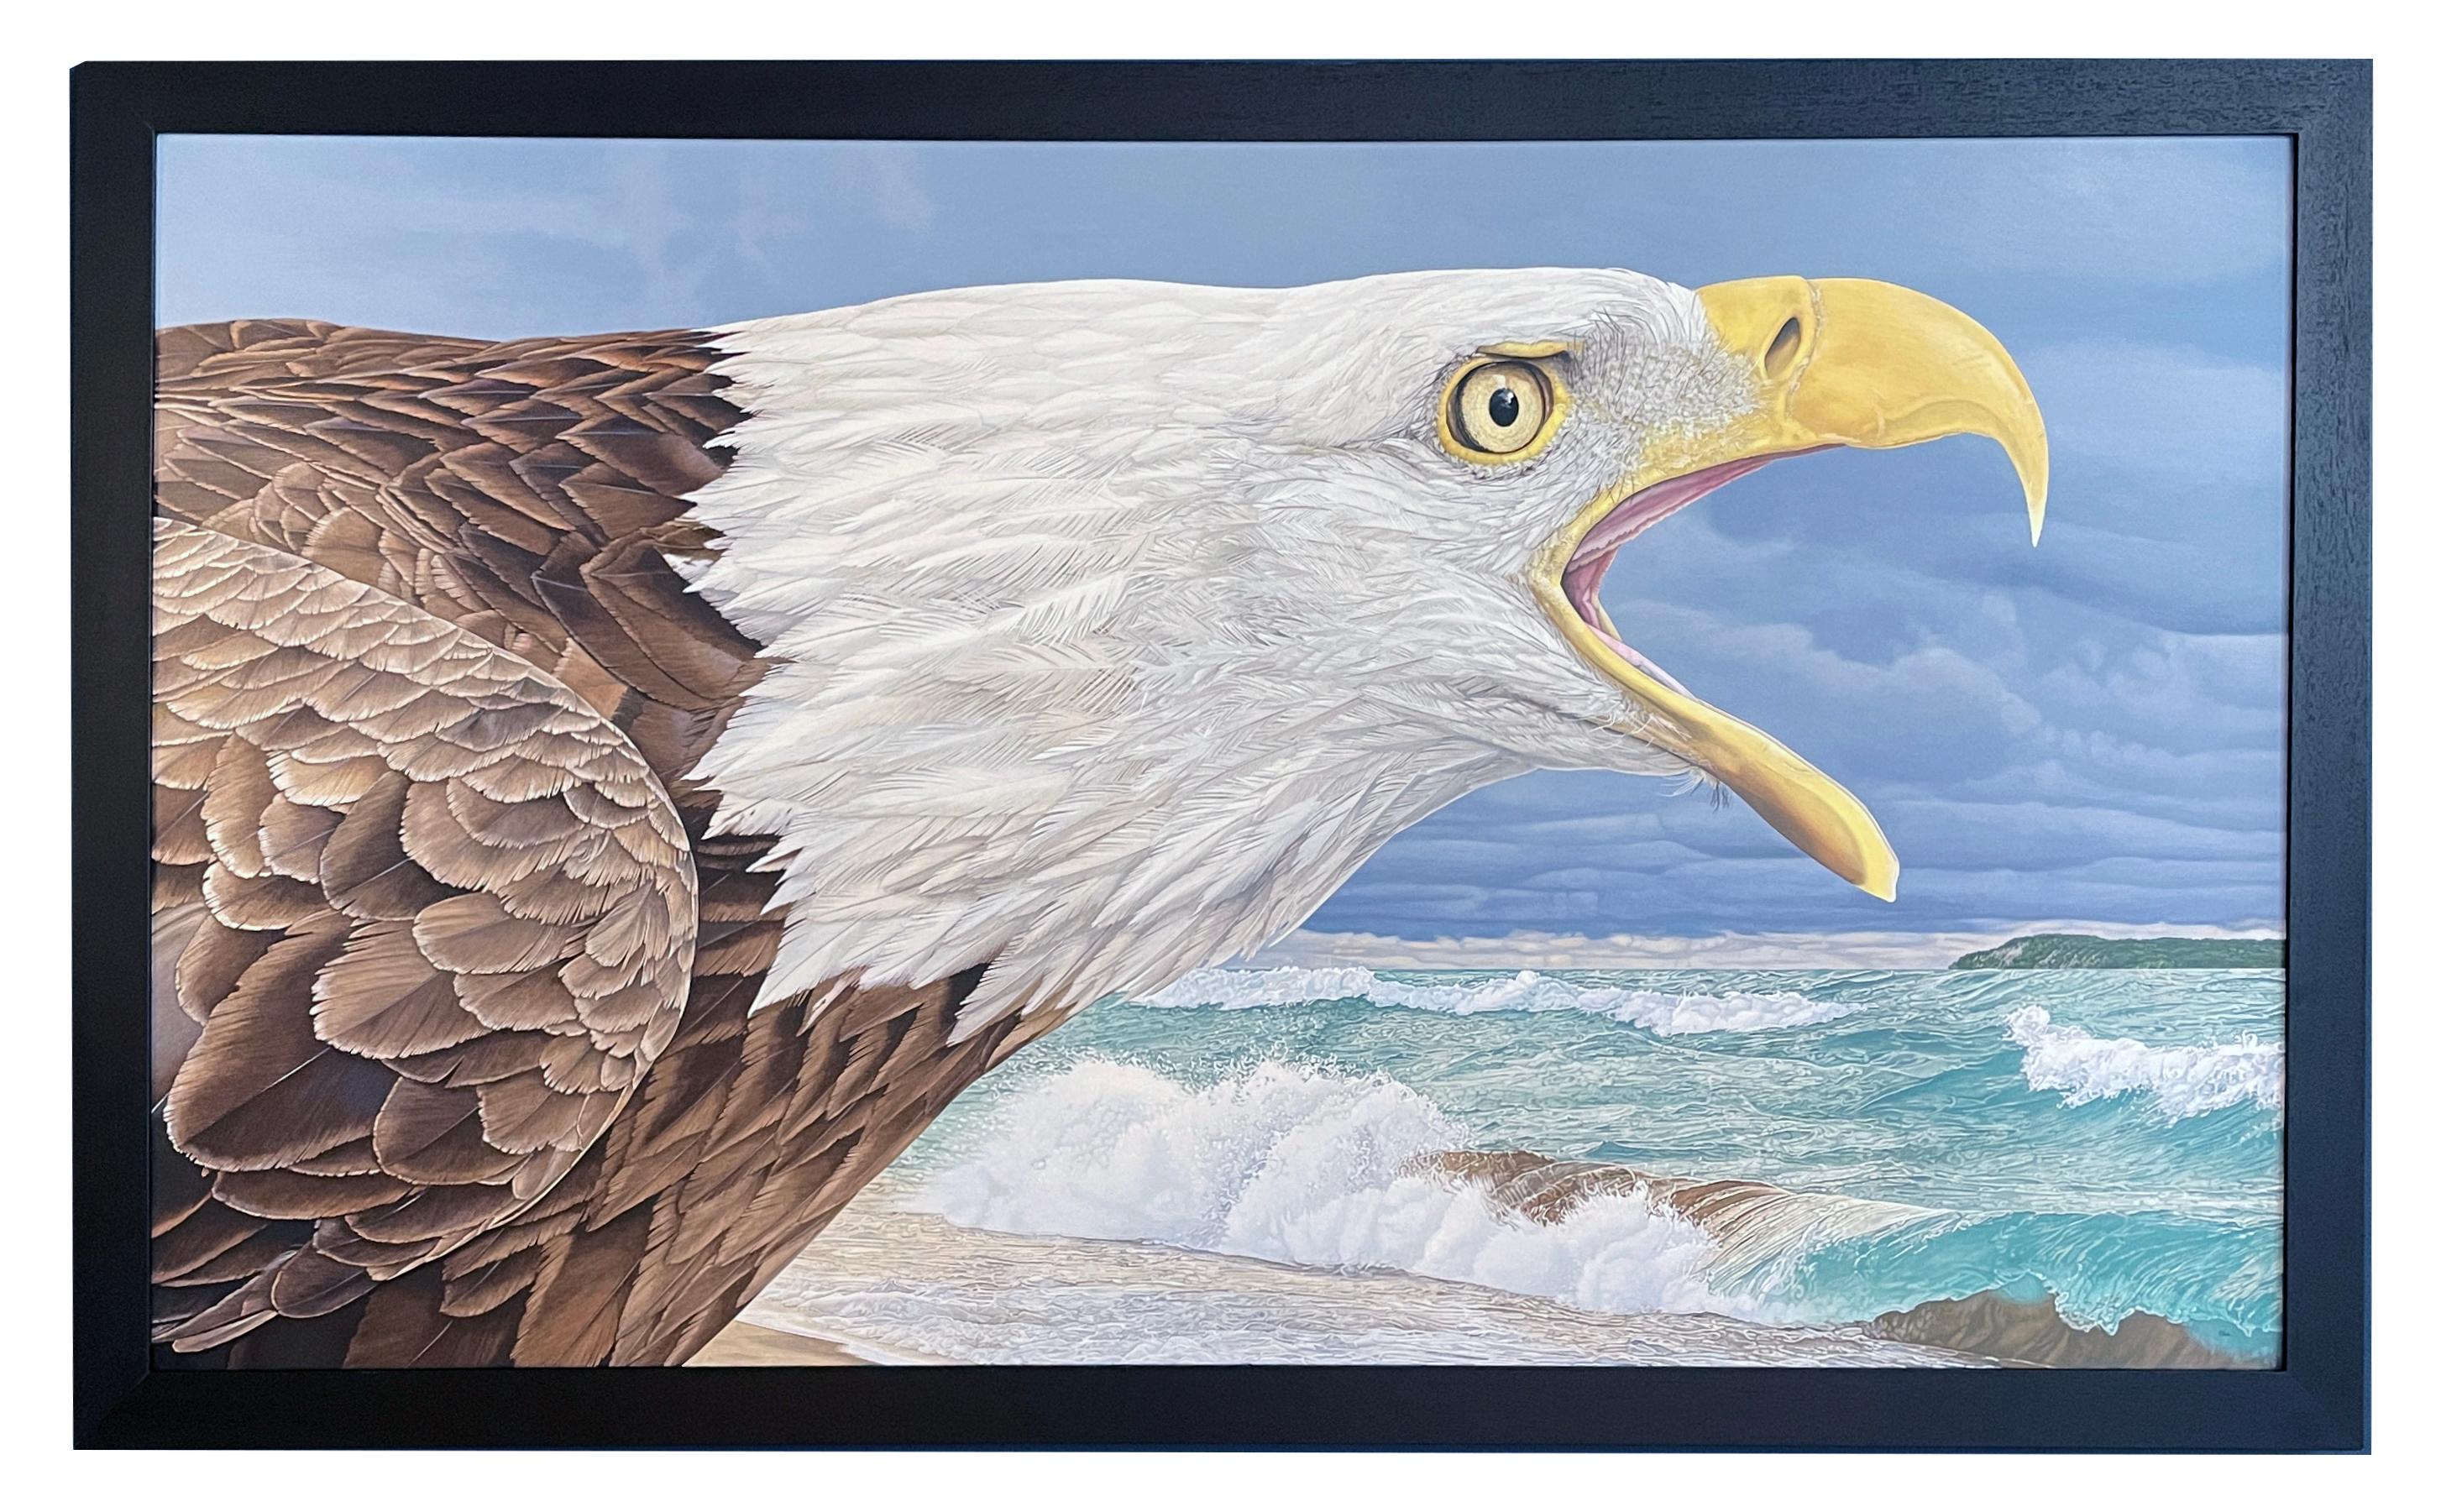 A male bald eagle screeches to be heard above the stormy backdrop of Lake Michigan's Manitou Passage in Northern Michigan.  Extraordinarily painted with such realistic detail, this majestic bird's feathers beg for the viewer to come in for a closer